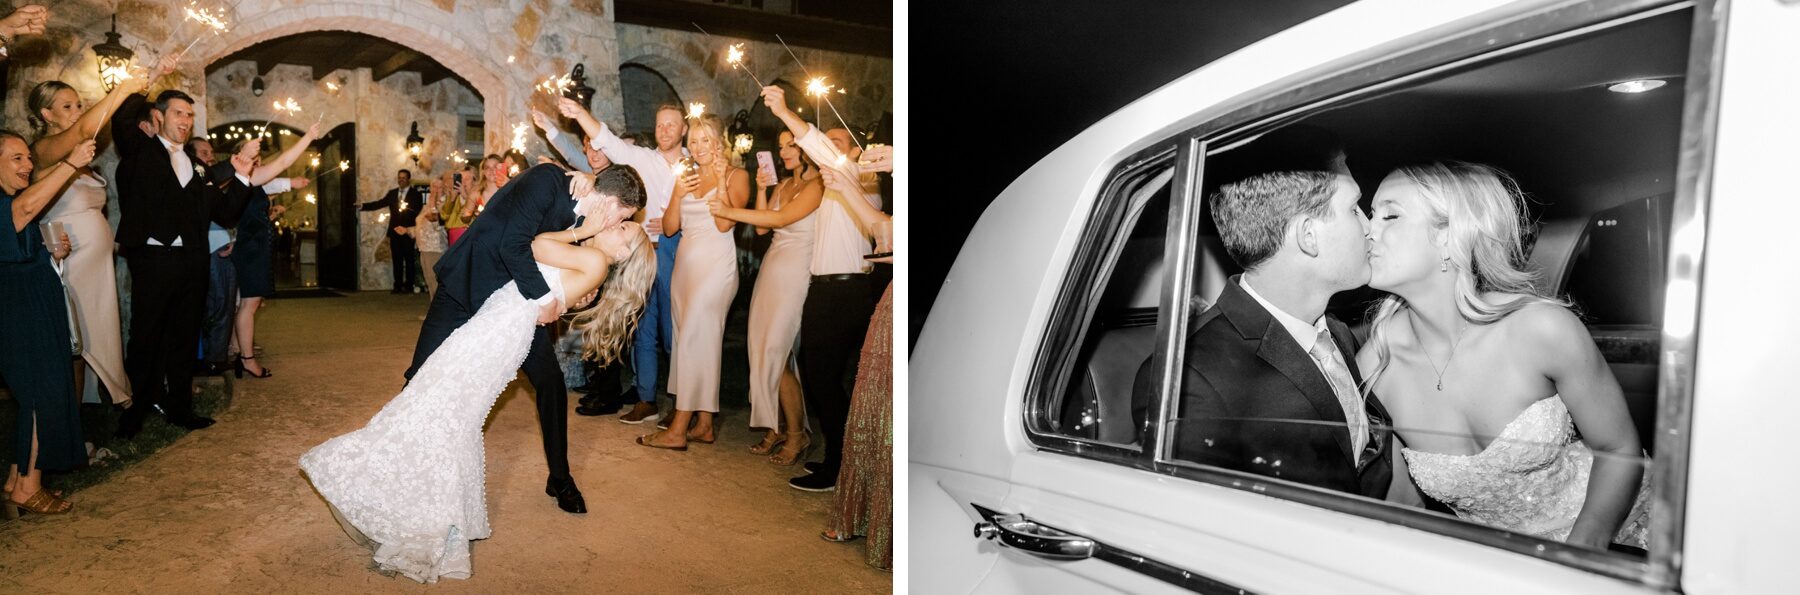 Groom dipping bride during kiss at wedding reception exit and kissing in getaway car